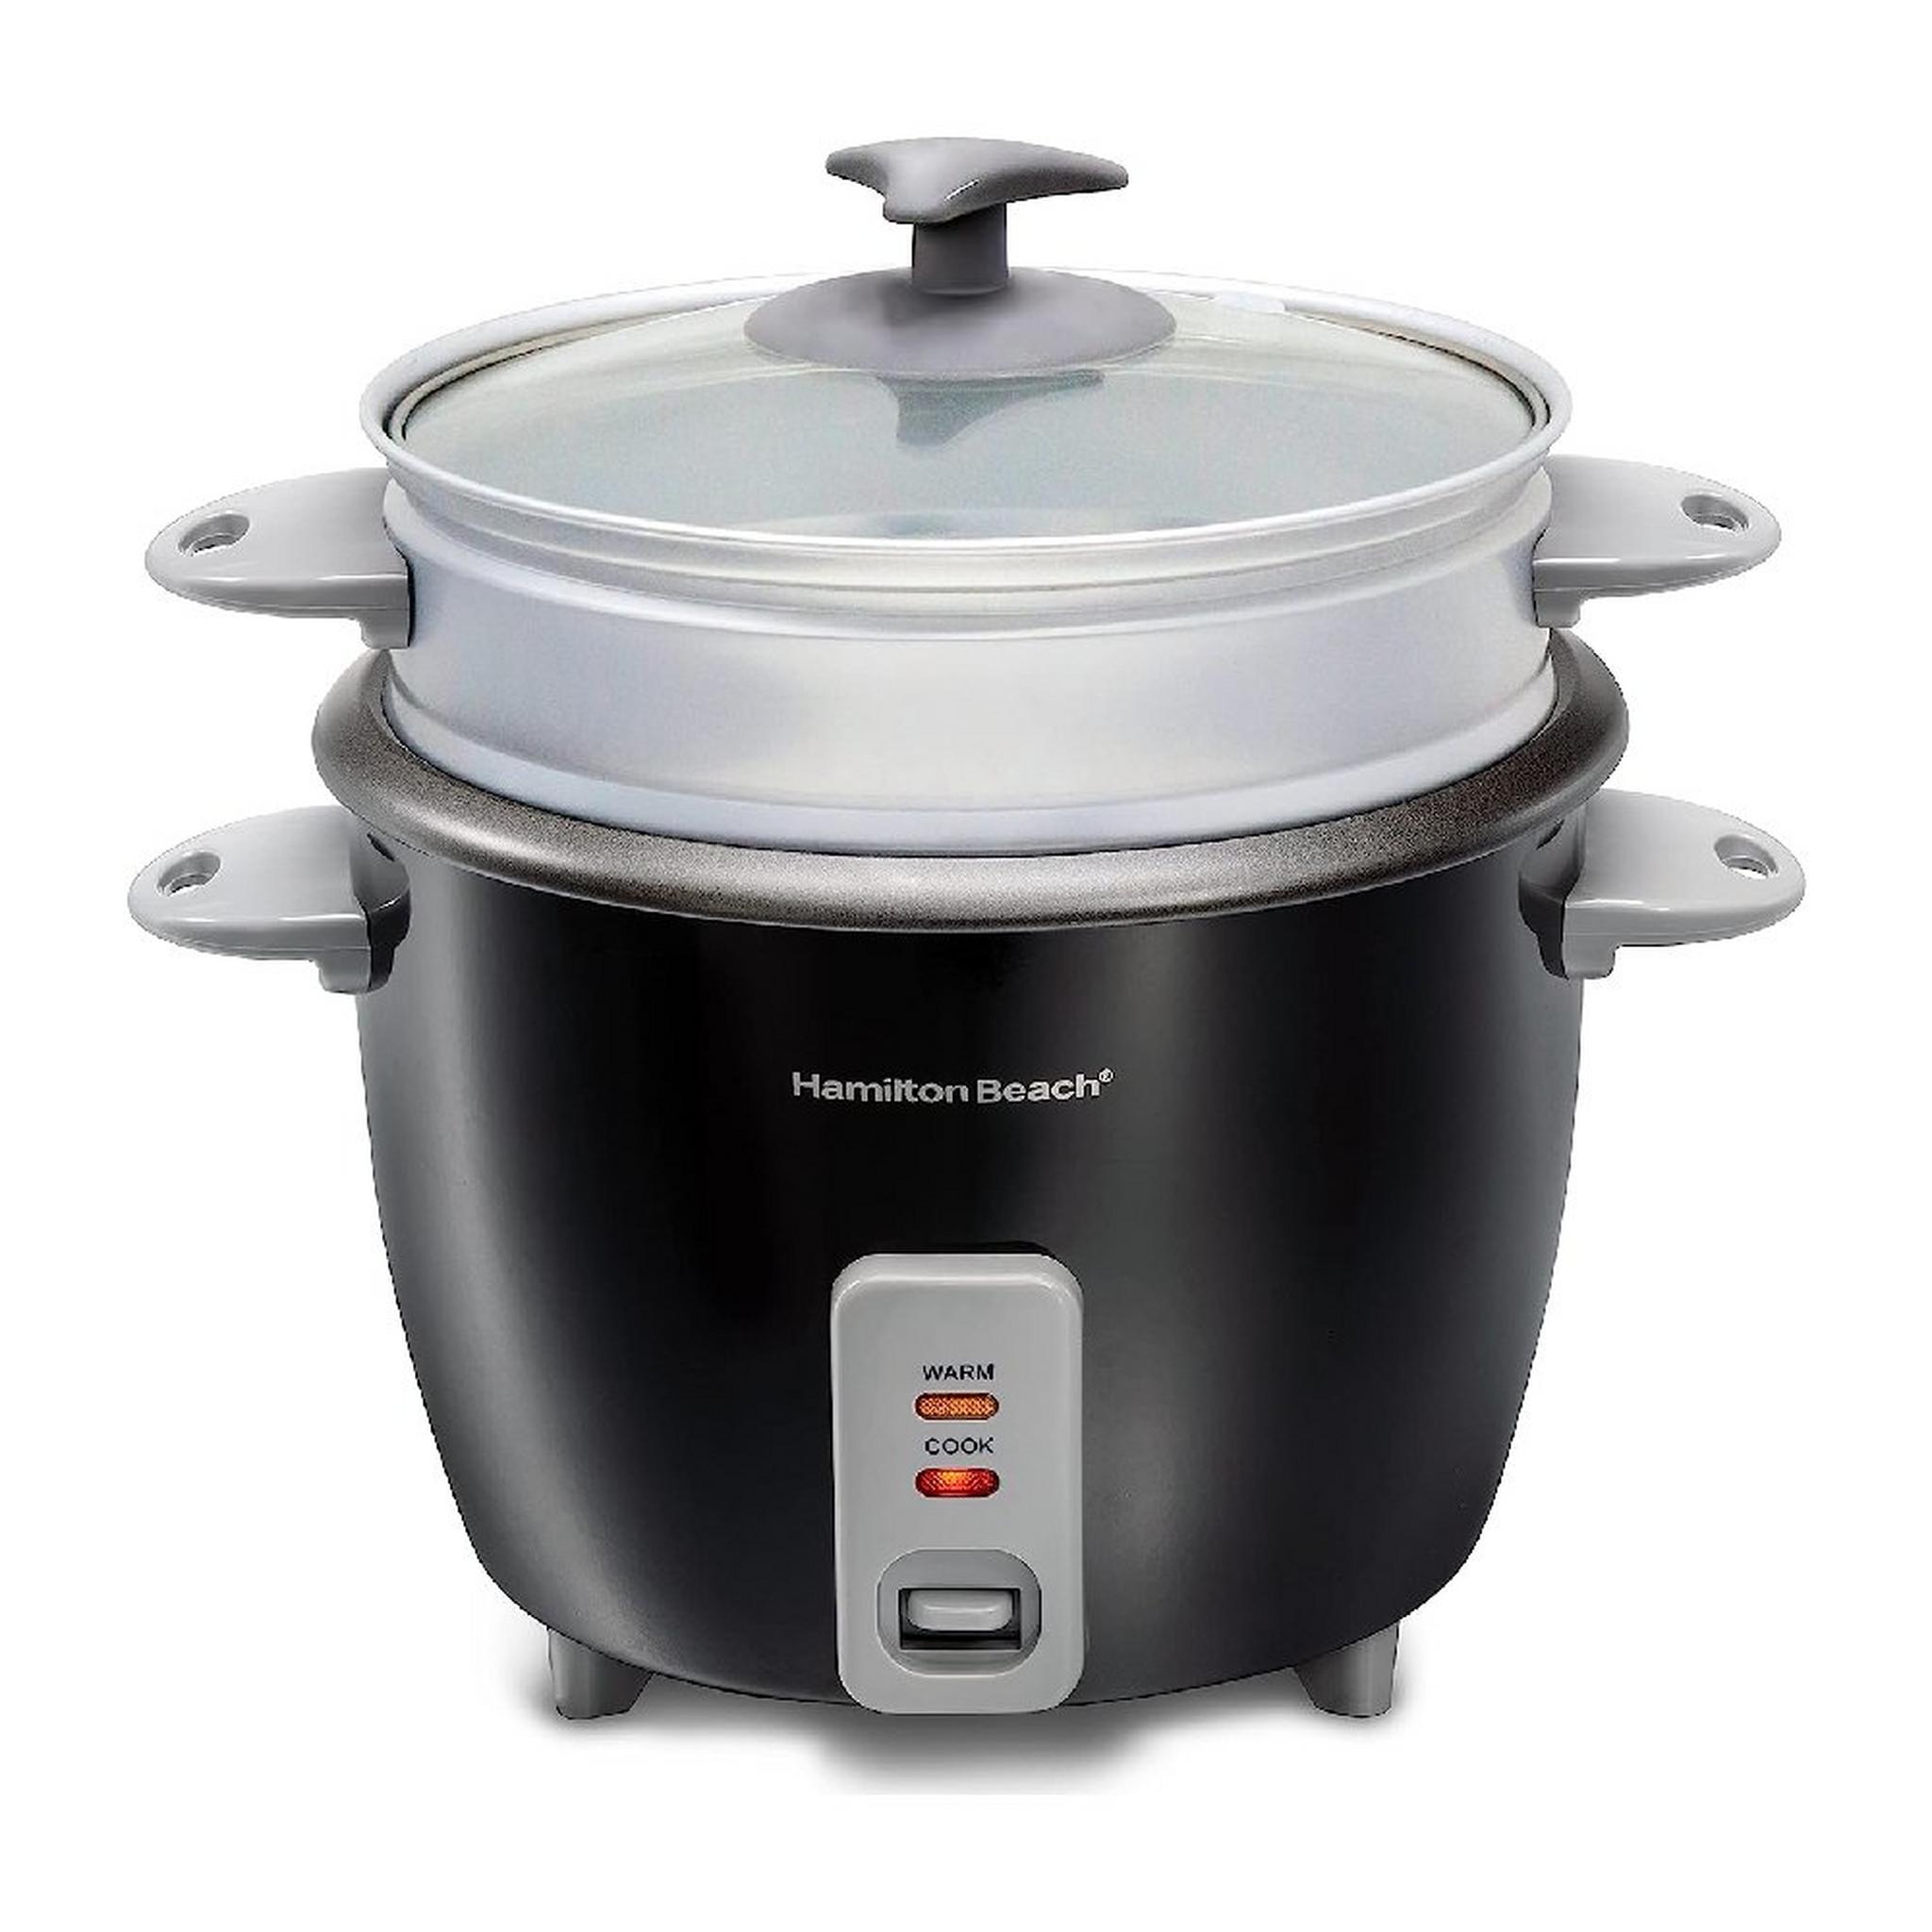 Hamilton Beach Rice Cooker and Food Steamer, 500W, 1.5L, 37517-ME - Black